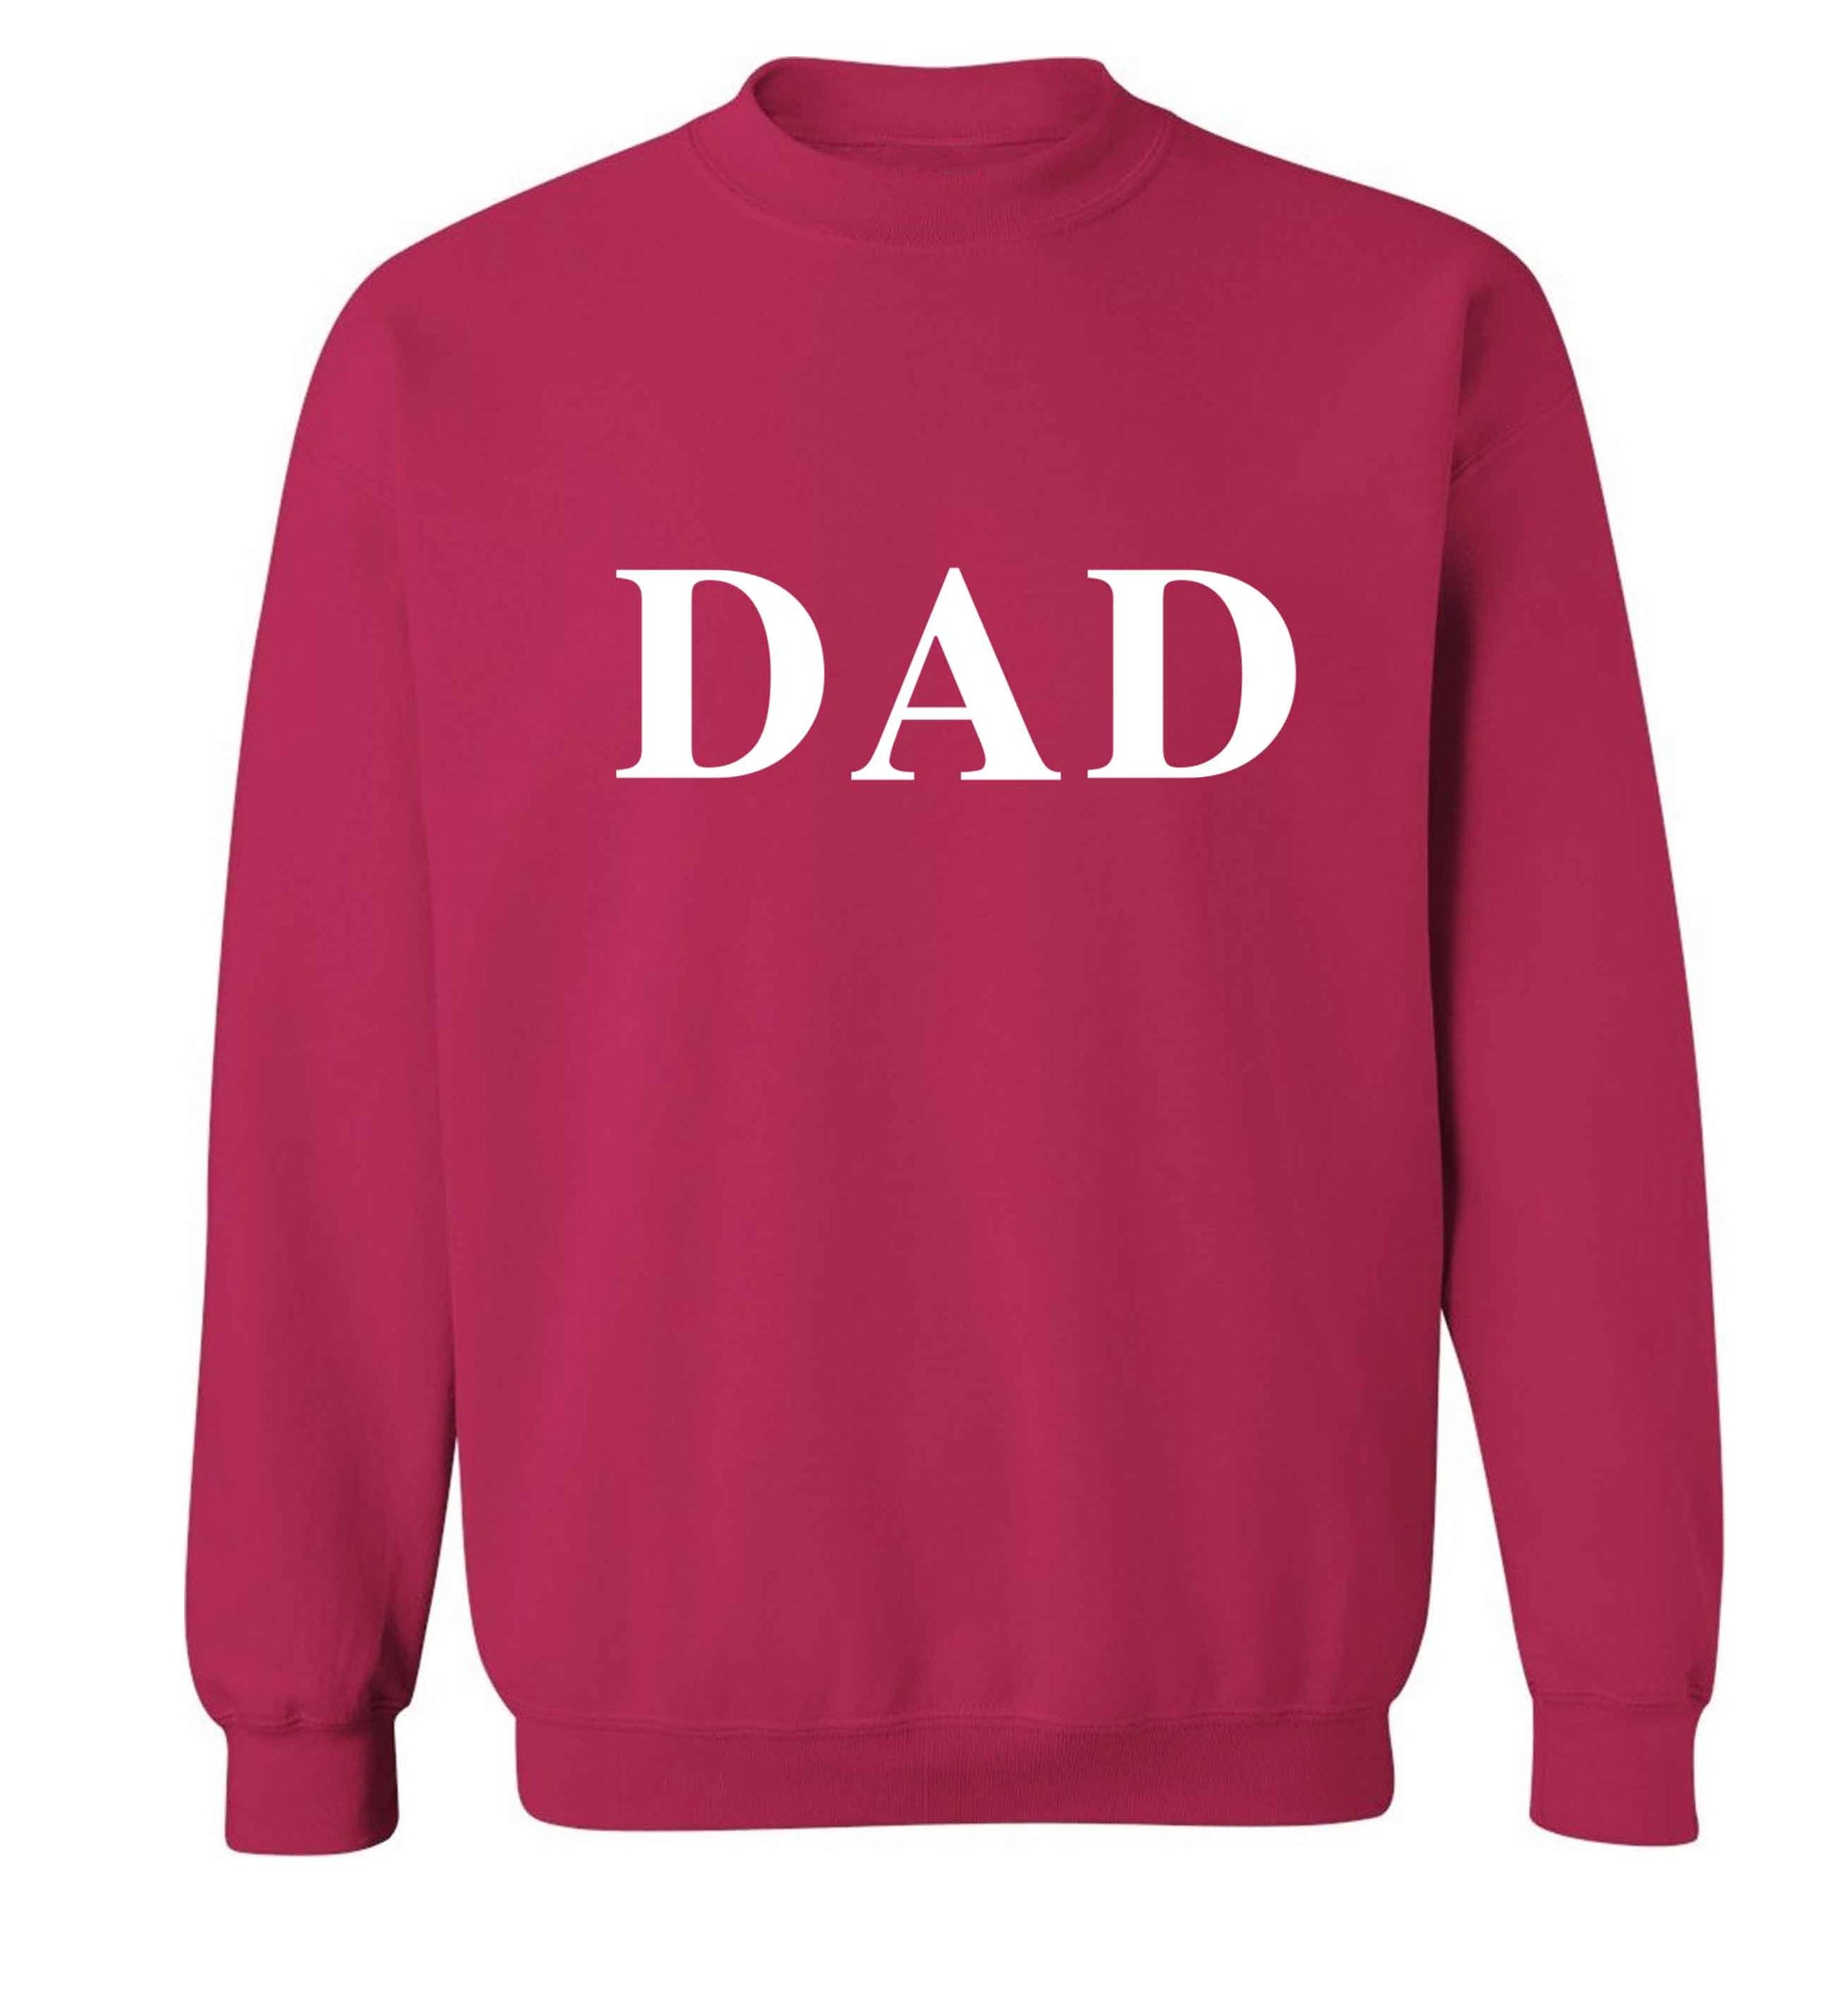 Dad adult's unisex pink sweater 2XL